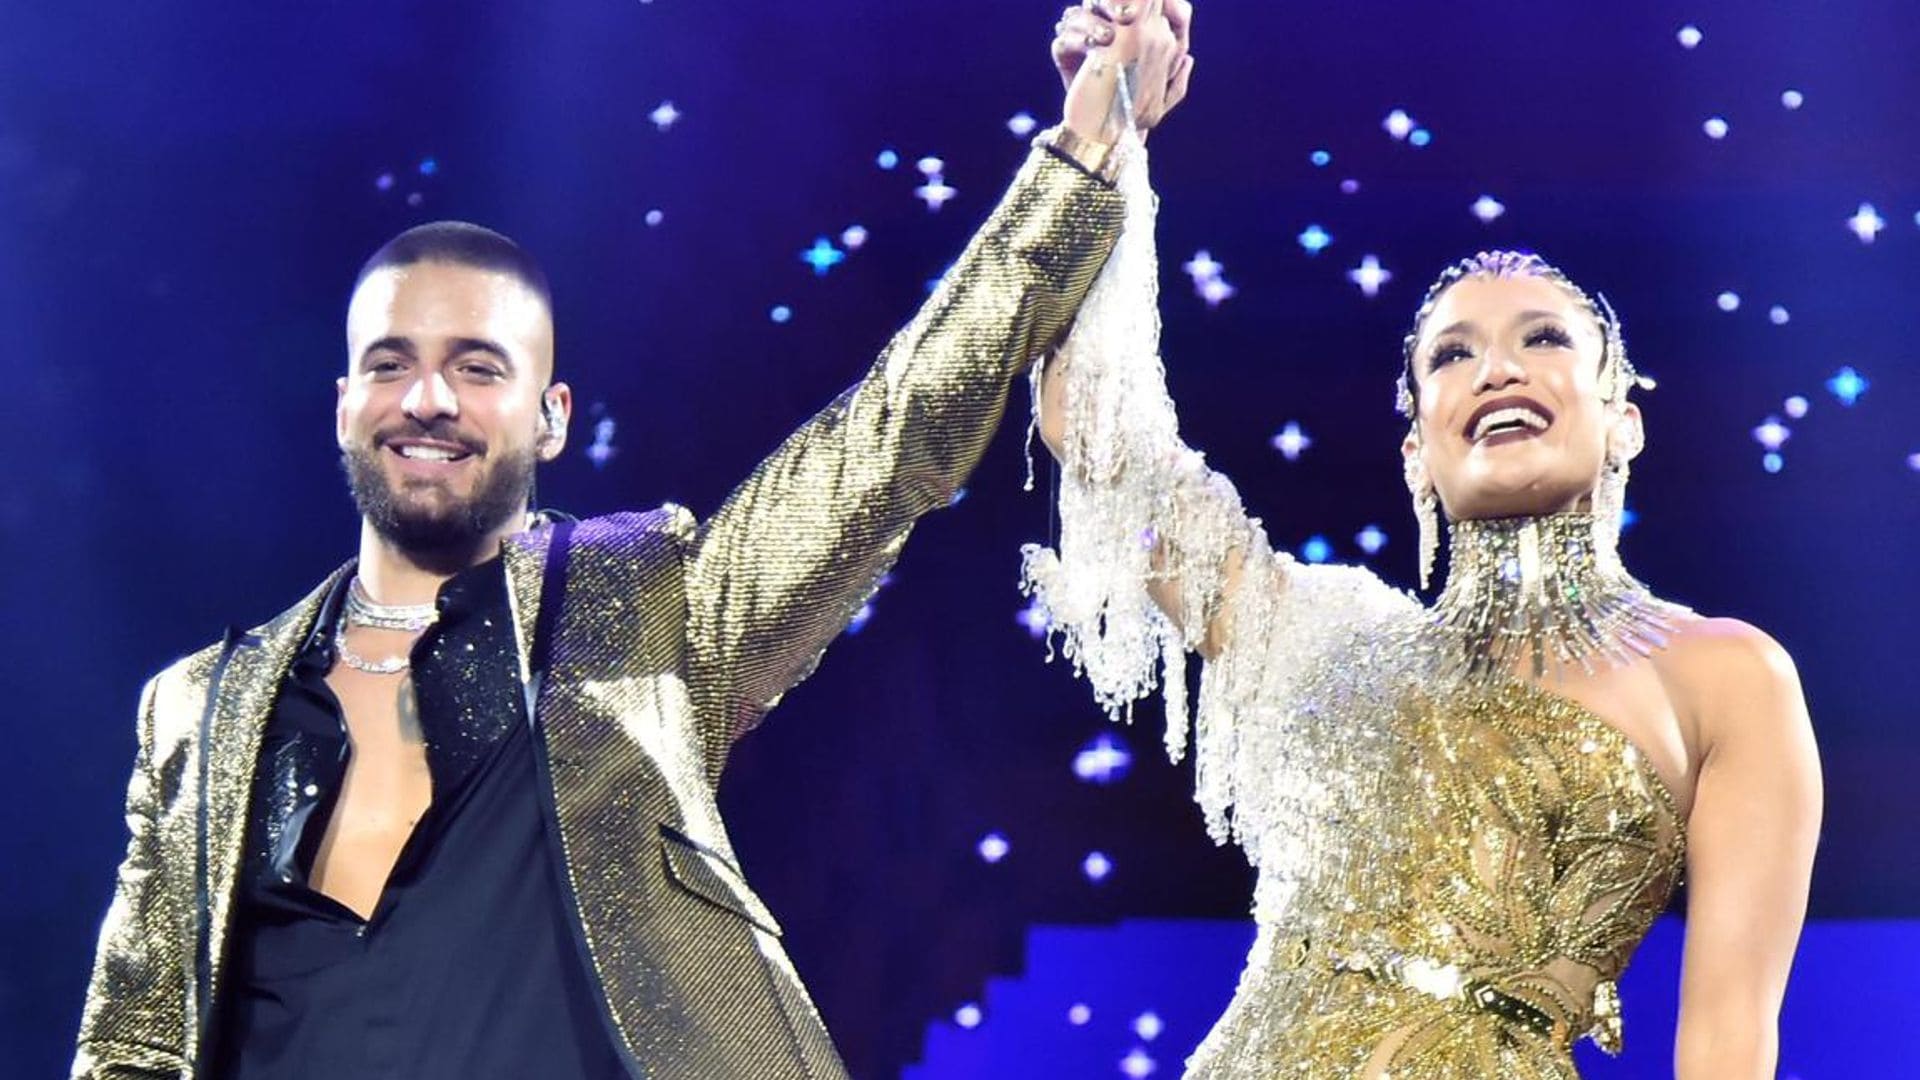 Jennifer Lopez and Maluma to perform together at American Music Awards: Details